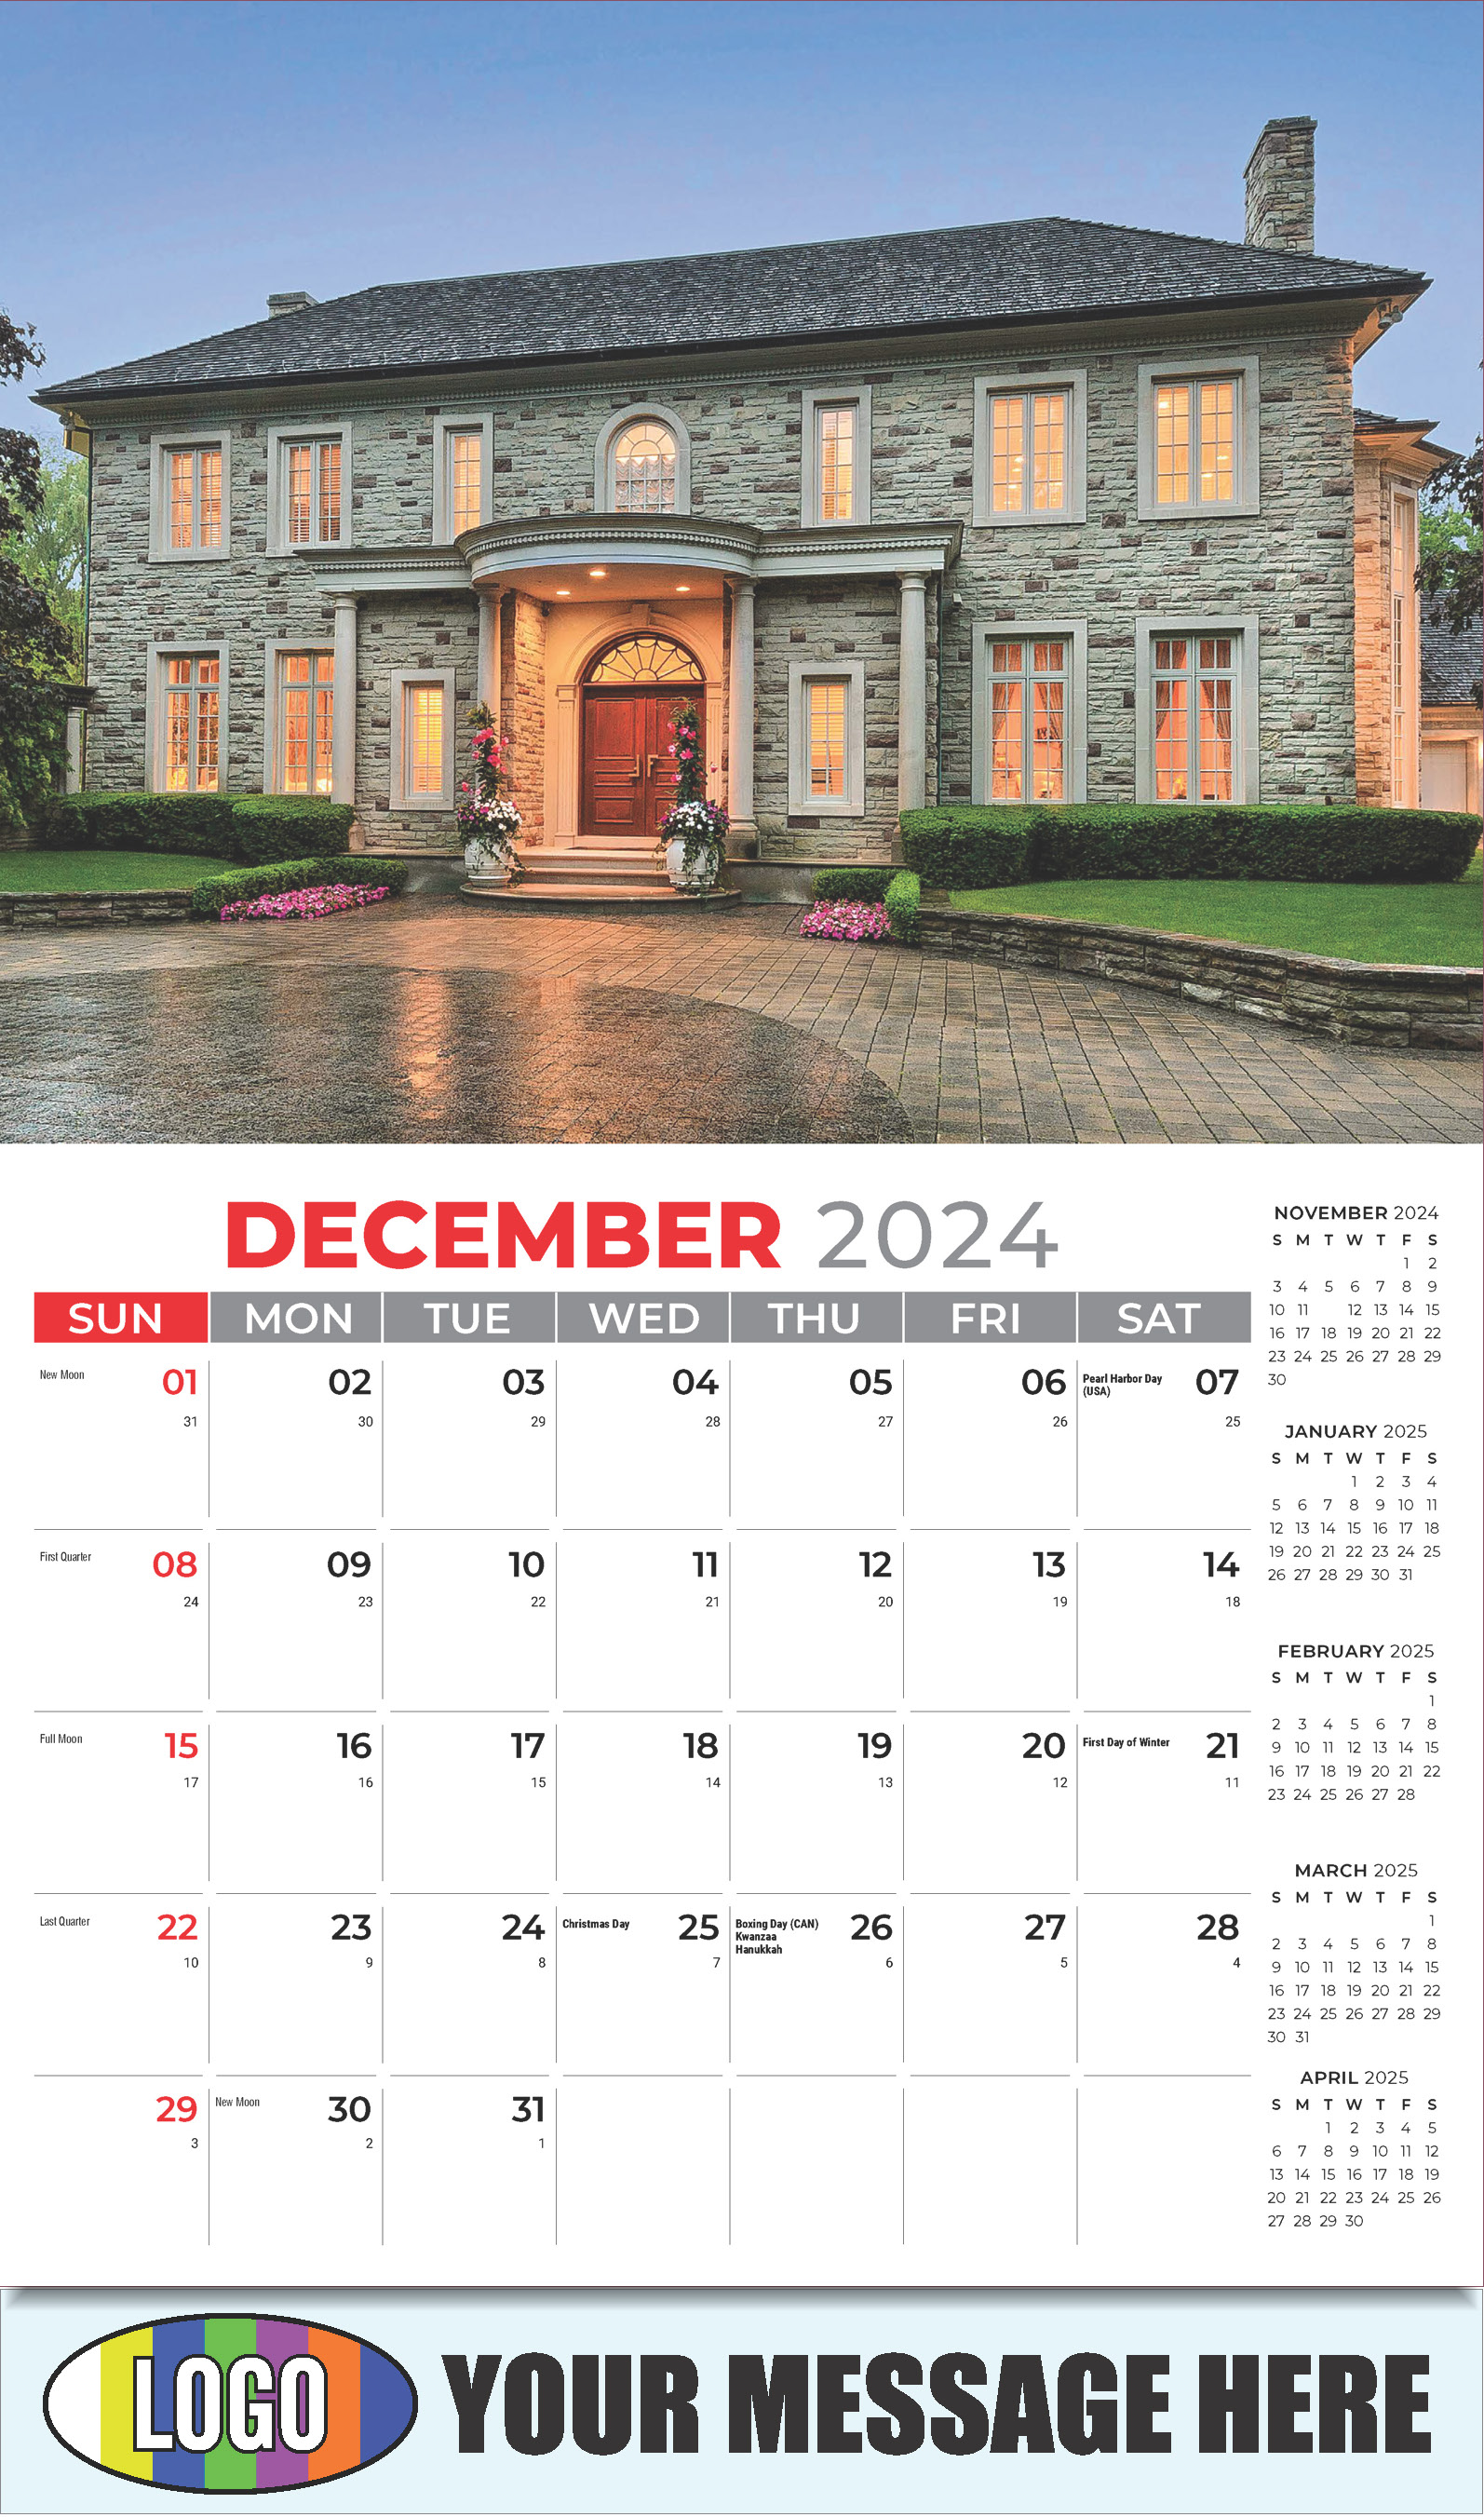 Luxury Homes 2025 Real Estate Agent Promotional Wall Calendar - December_a